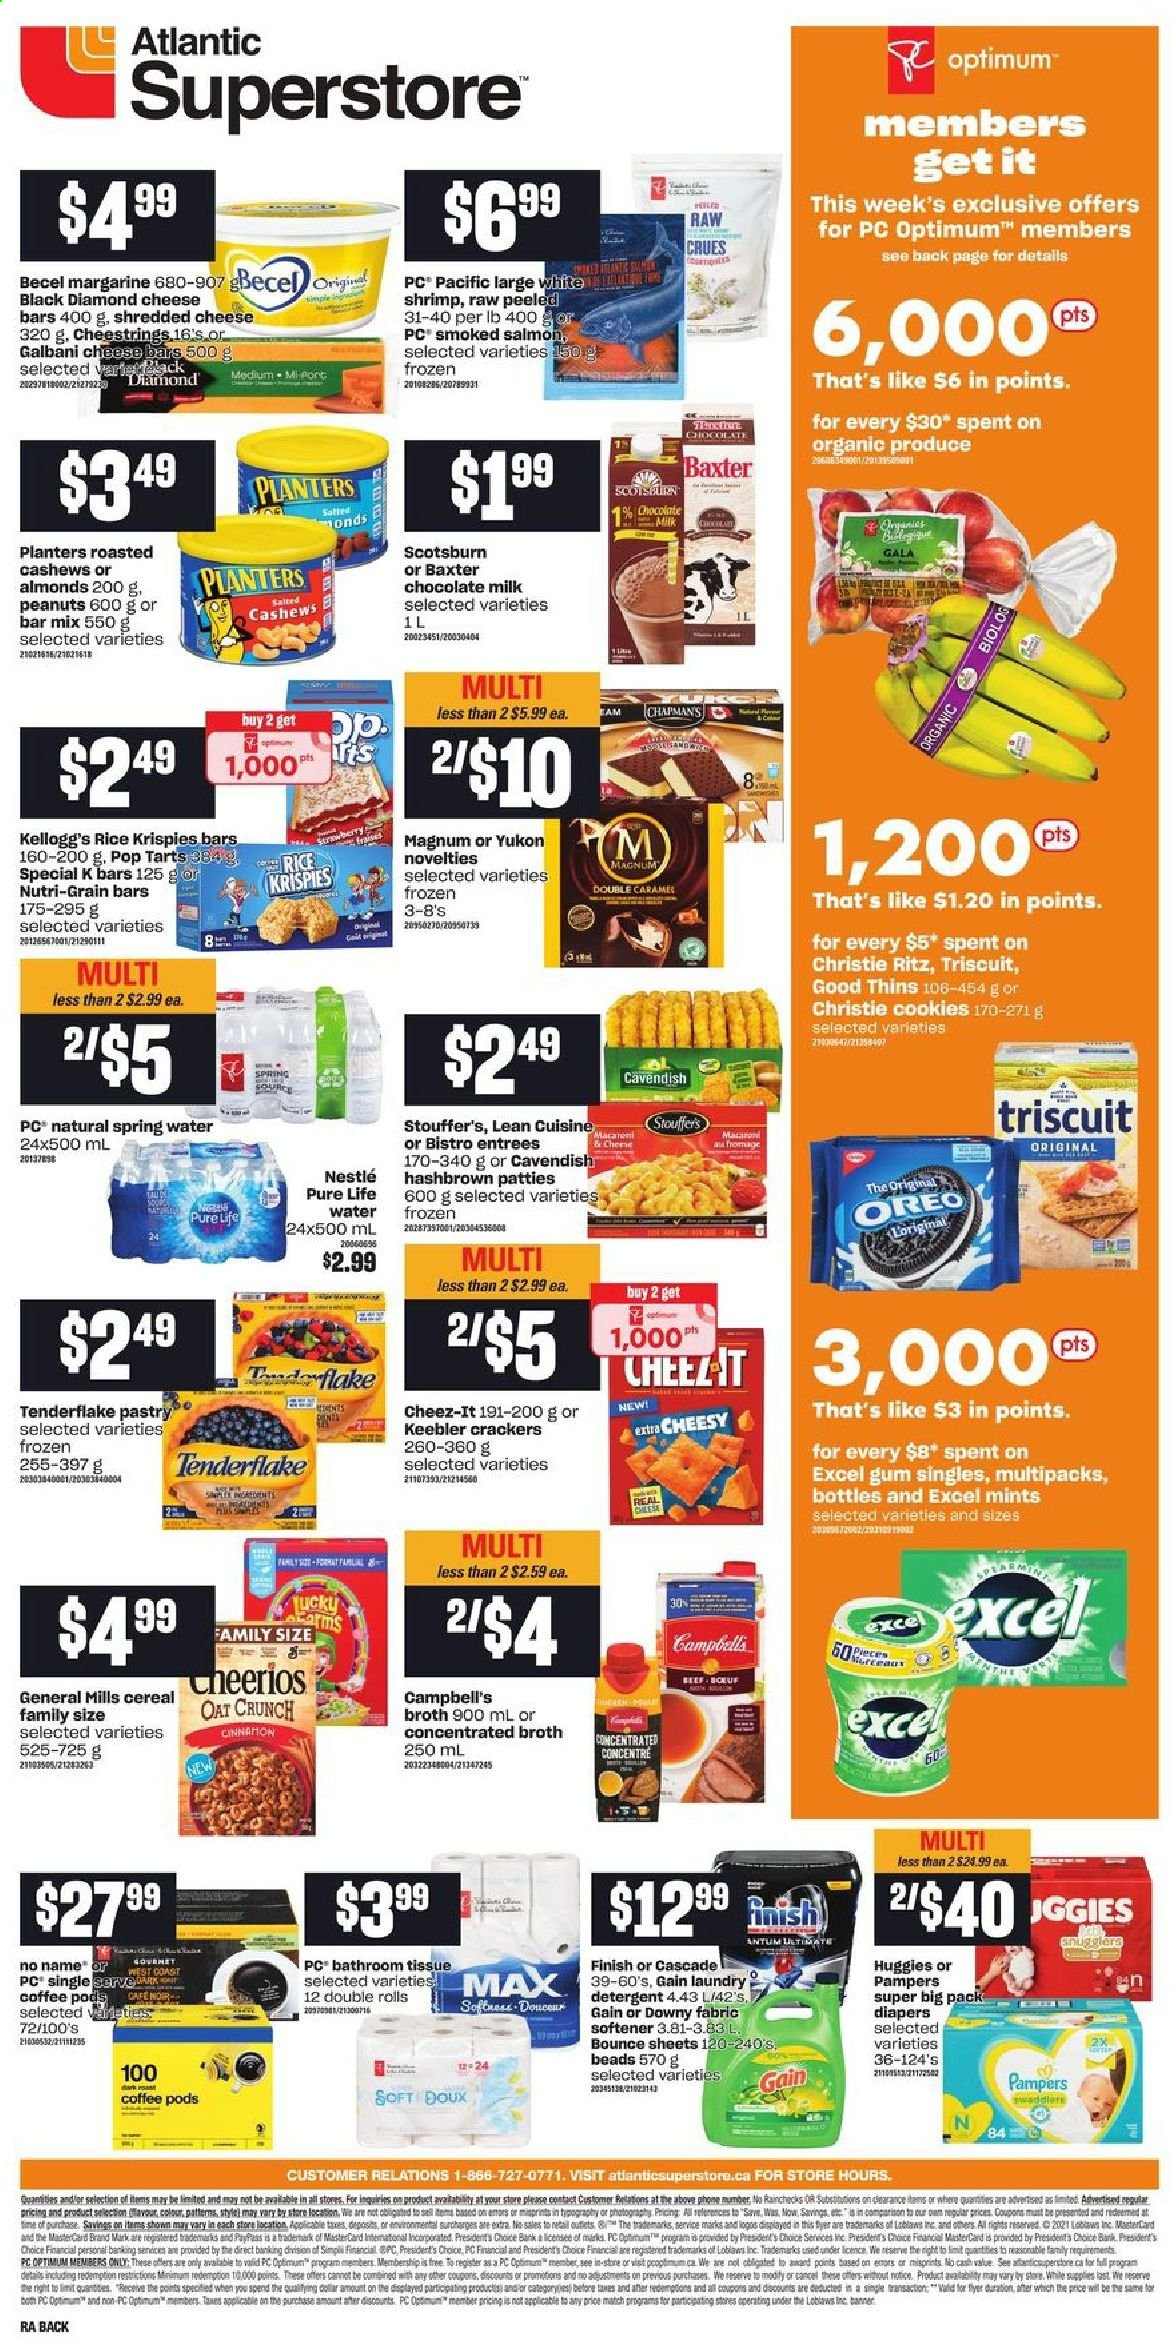 thumbnail - Atlantic Superstore Flyer - April 15, 2021 - April 21, 2021 - Sales products - Gala, salmon, smoked salmon, shrimps, No Name, Campbell's, Lean Cuisine, shredded cheese, string cheese, Président, Galbani, Oreo, milk, margarine, Magnum, Stouffer's, cookies, milk chocolate, chocolate, crackers, Kellogg's, Pop-Tarts, Nutri-Grain bars, Keebler, RITZ, Thins, Cheez-It, oats, broth, cereals, Rice Krispies, Nutri-Grain, almonds, cashews, peanuts, Planters, spring water, Pure Life Water, coffee pods, nappies, bath tissue, Gain, fabric softener, Bounce, Cascade, Downy Laundry, Optimum, Nestlé, Huggies, Pampers. Page 2.